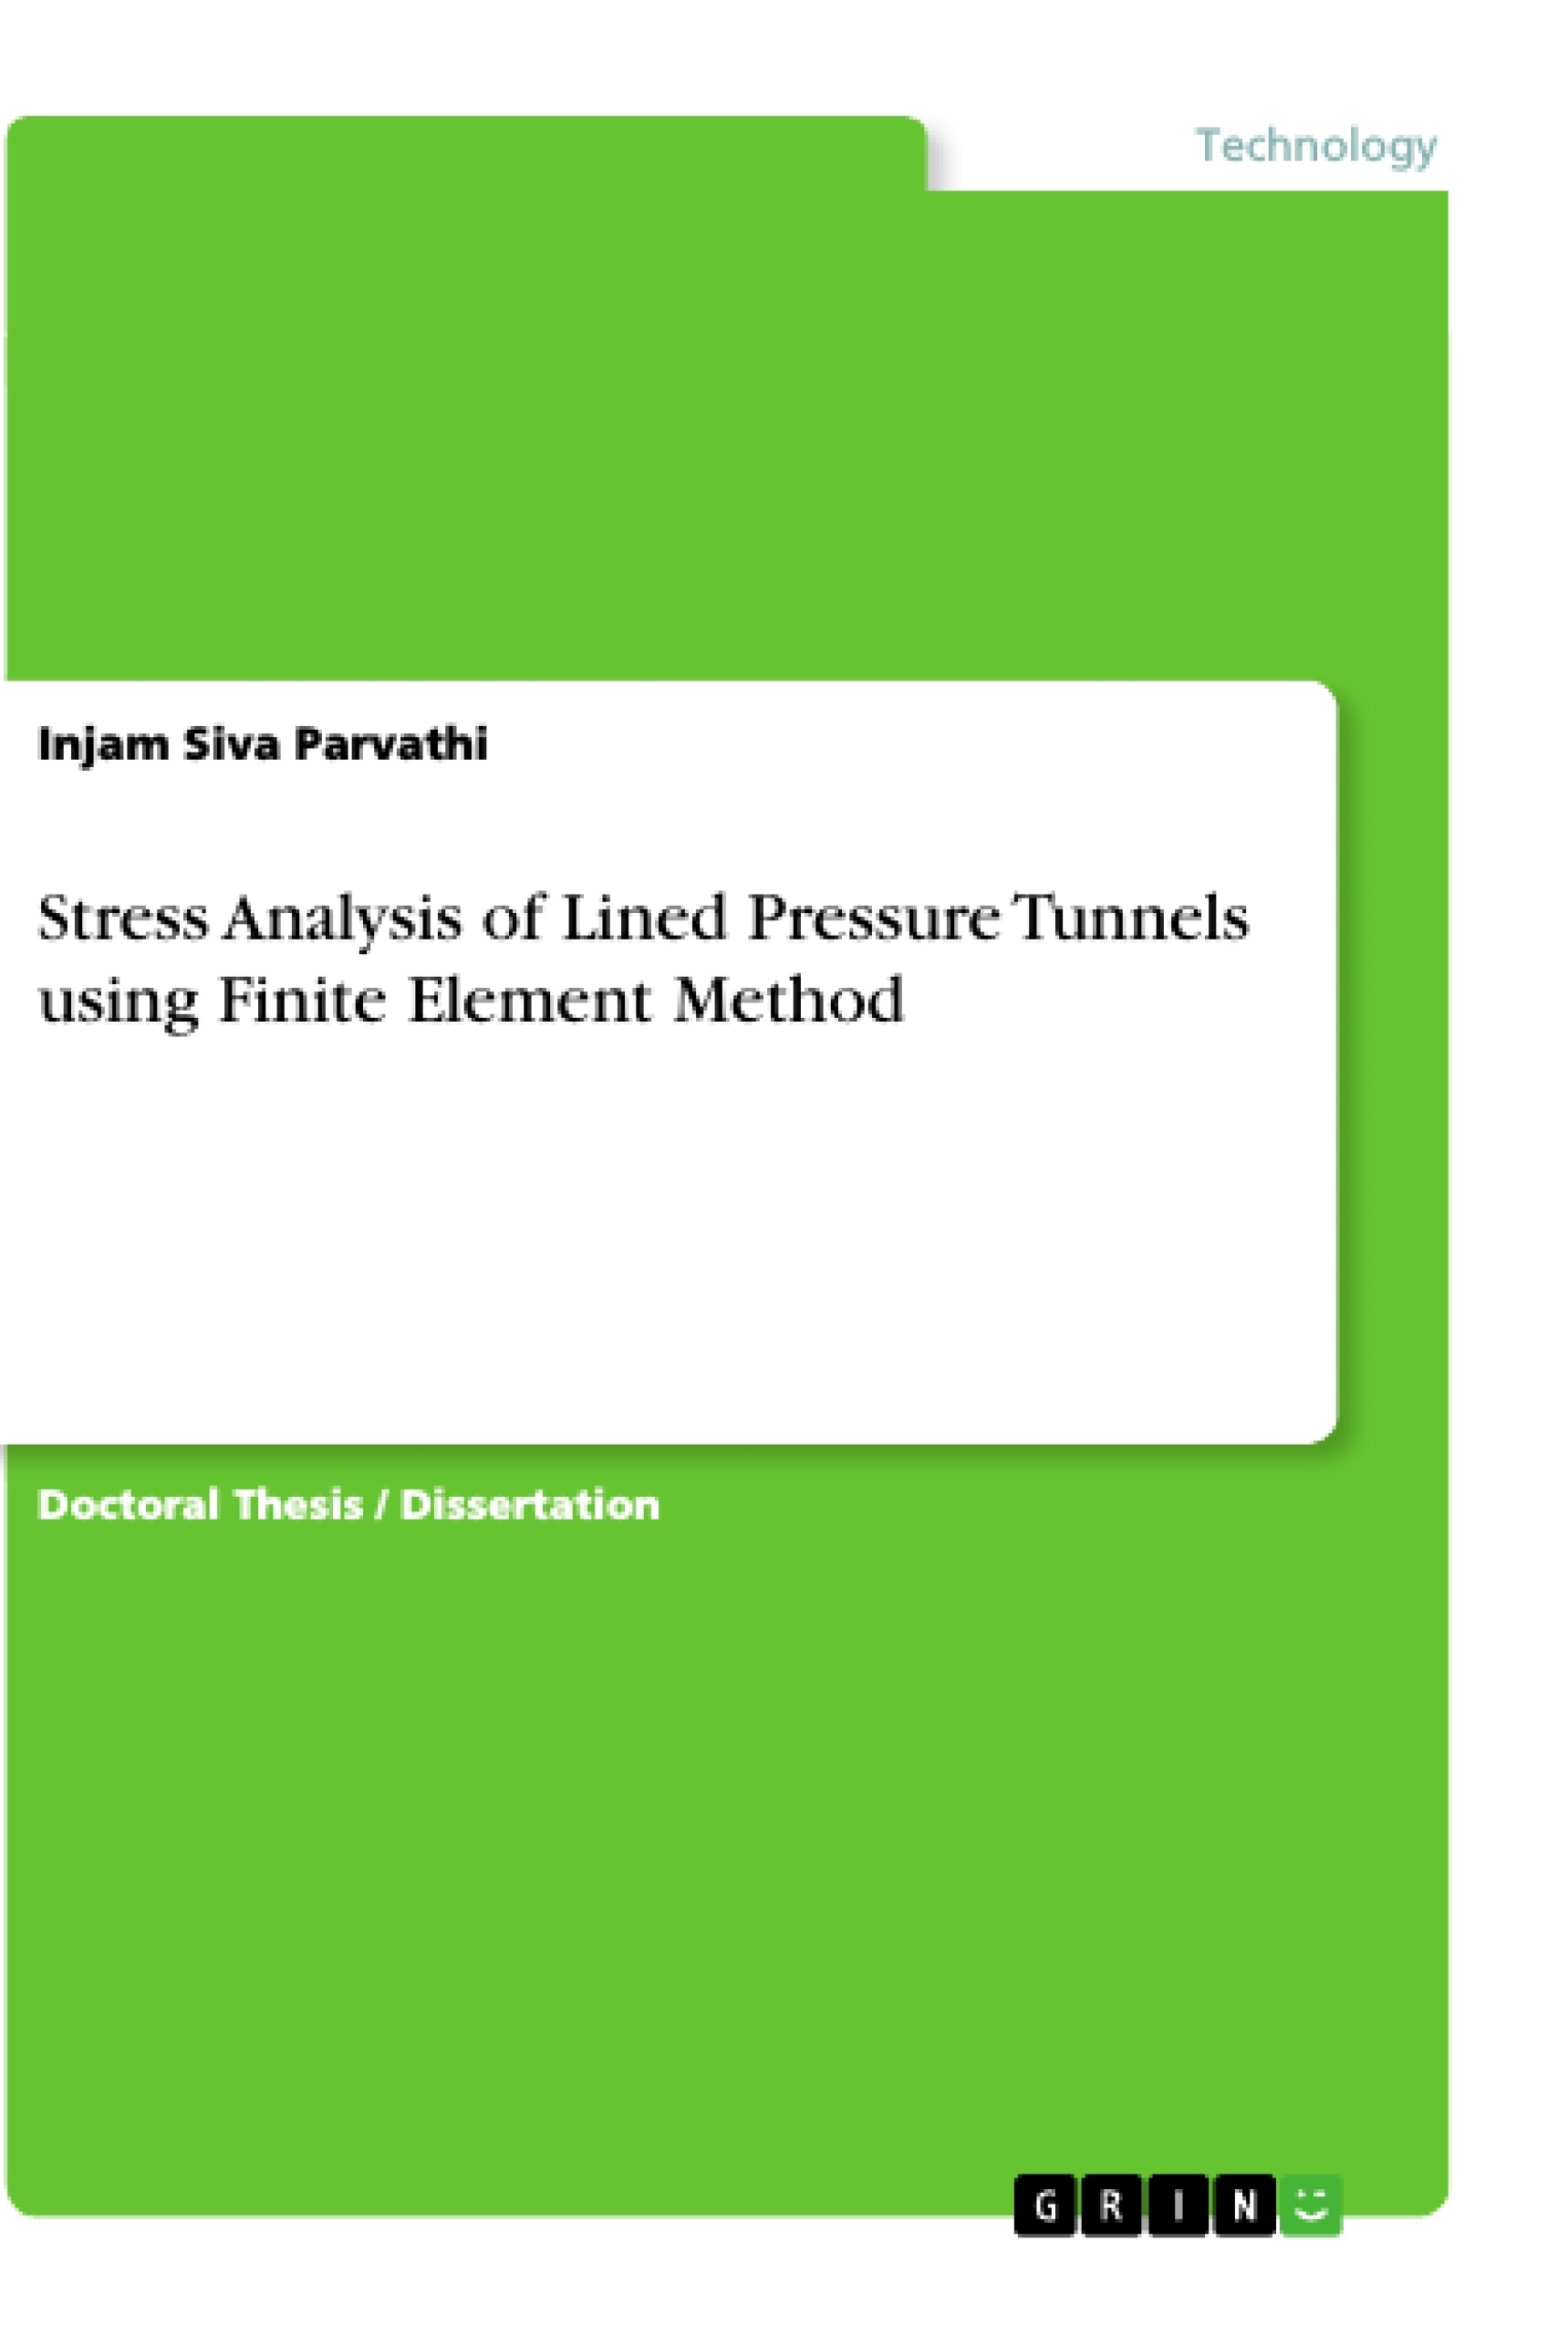 Titre: Stress Analysis of Lined Pressure Tunnels using Finite Element Method